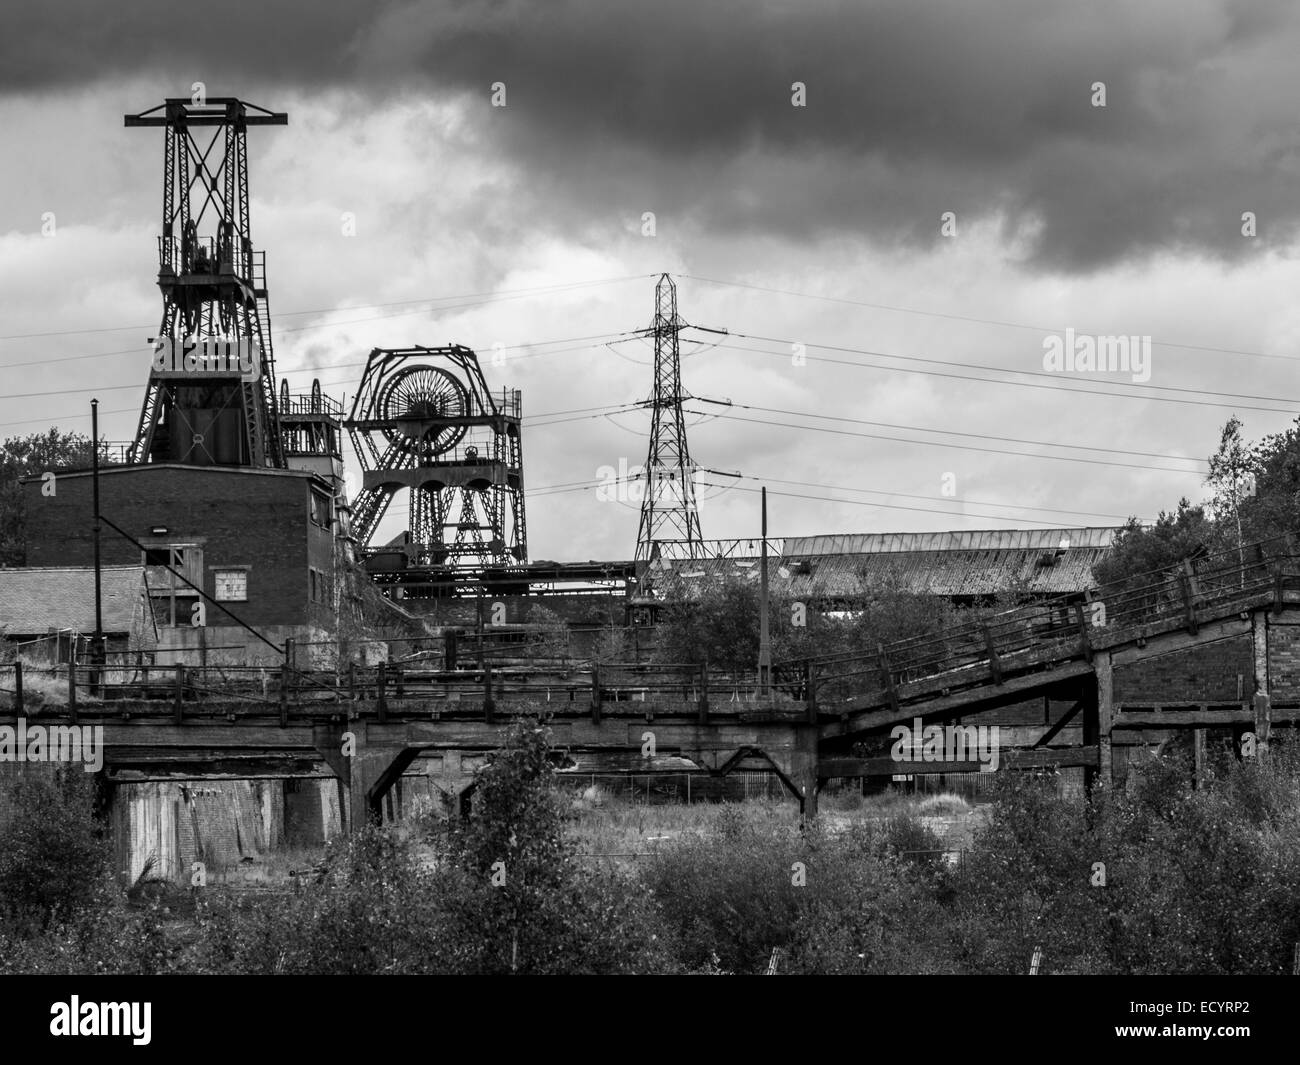 Chatterley Whitfield Colliery Stock Photo, Royalty Free Image: 76828698 ...